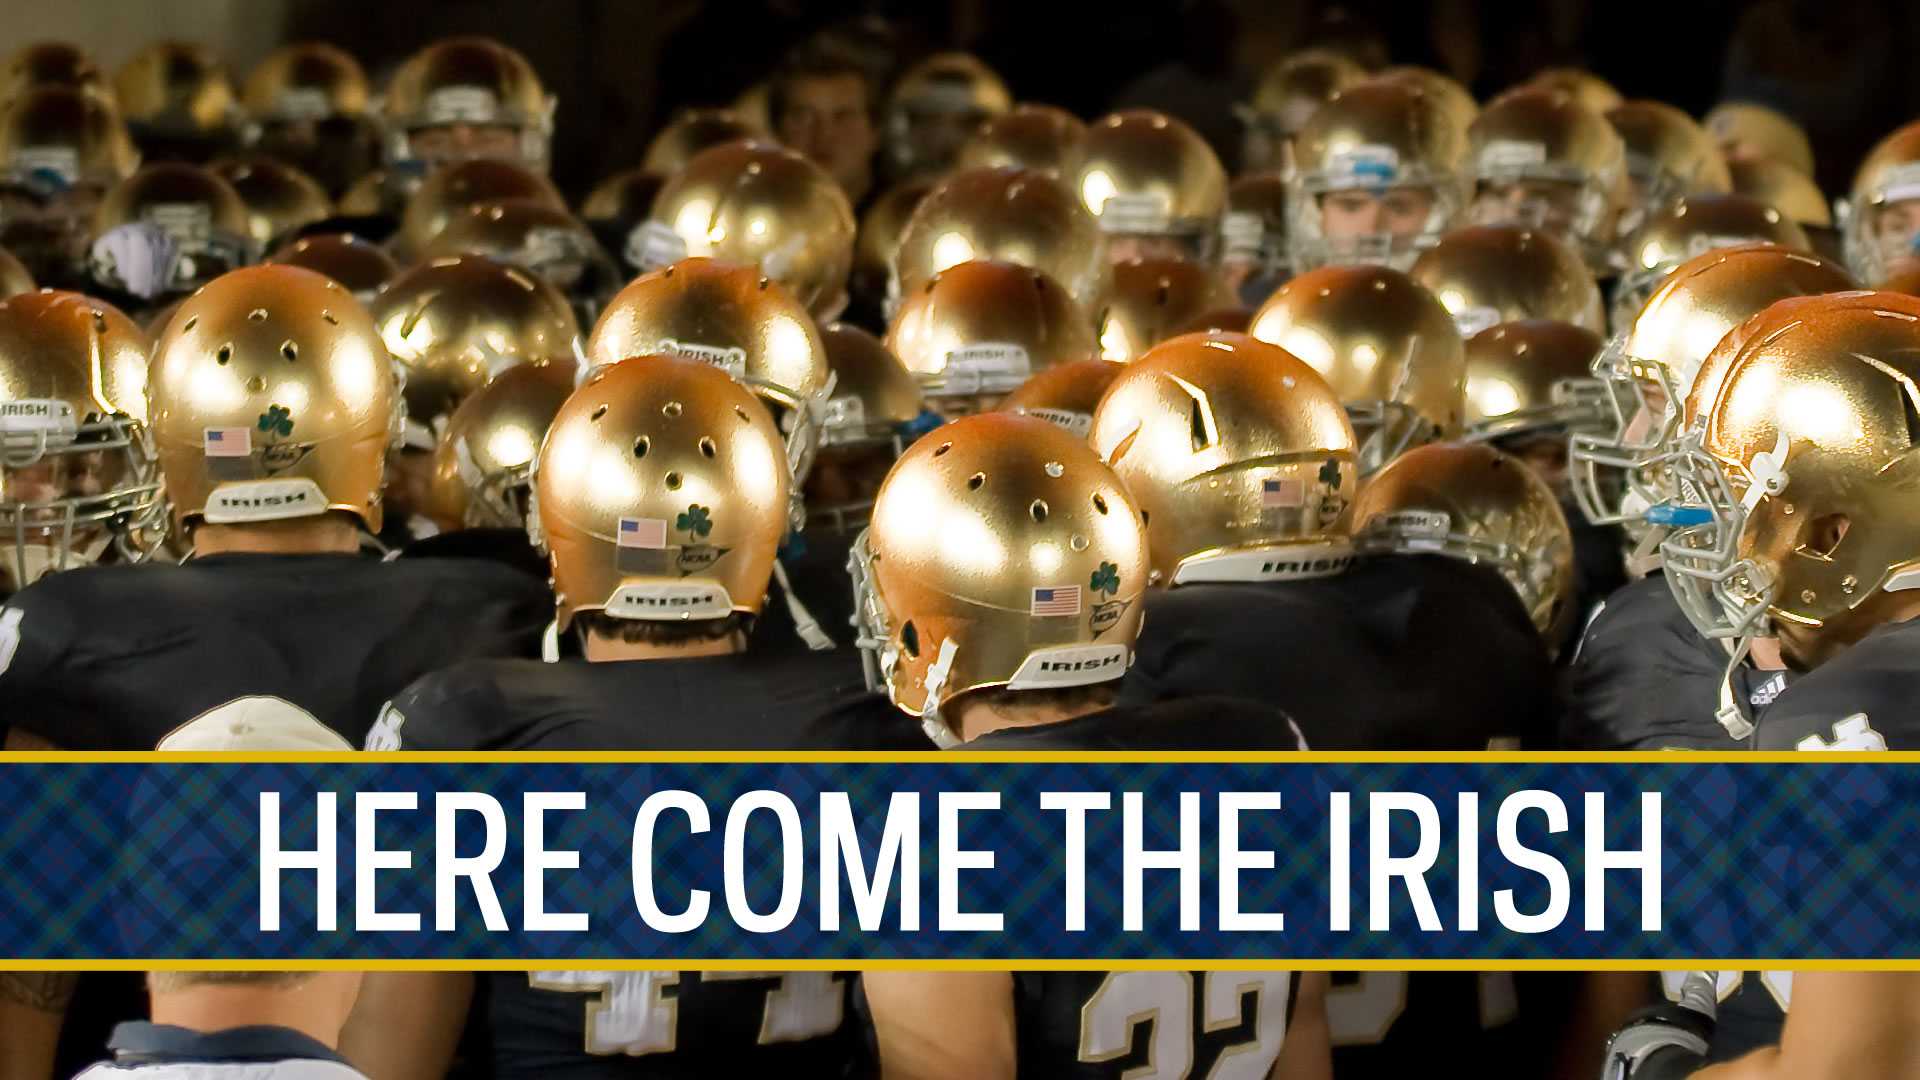 Desktop For Proud To Be Nd University Of Notre Dame Football